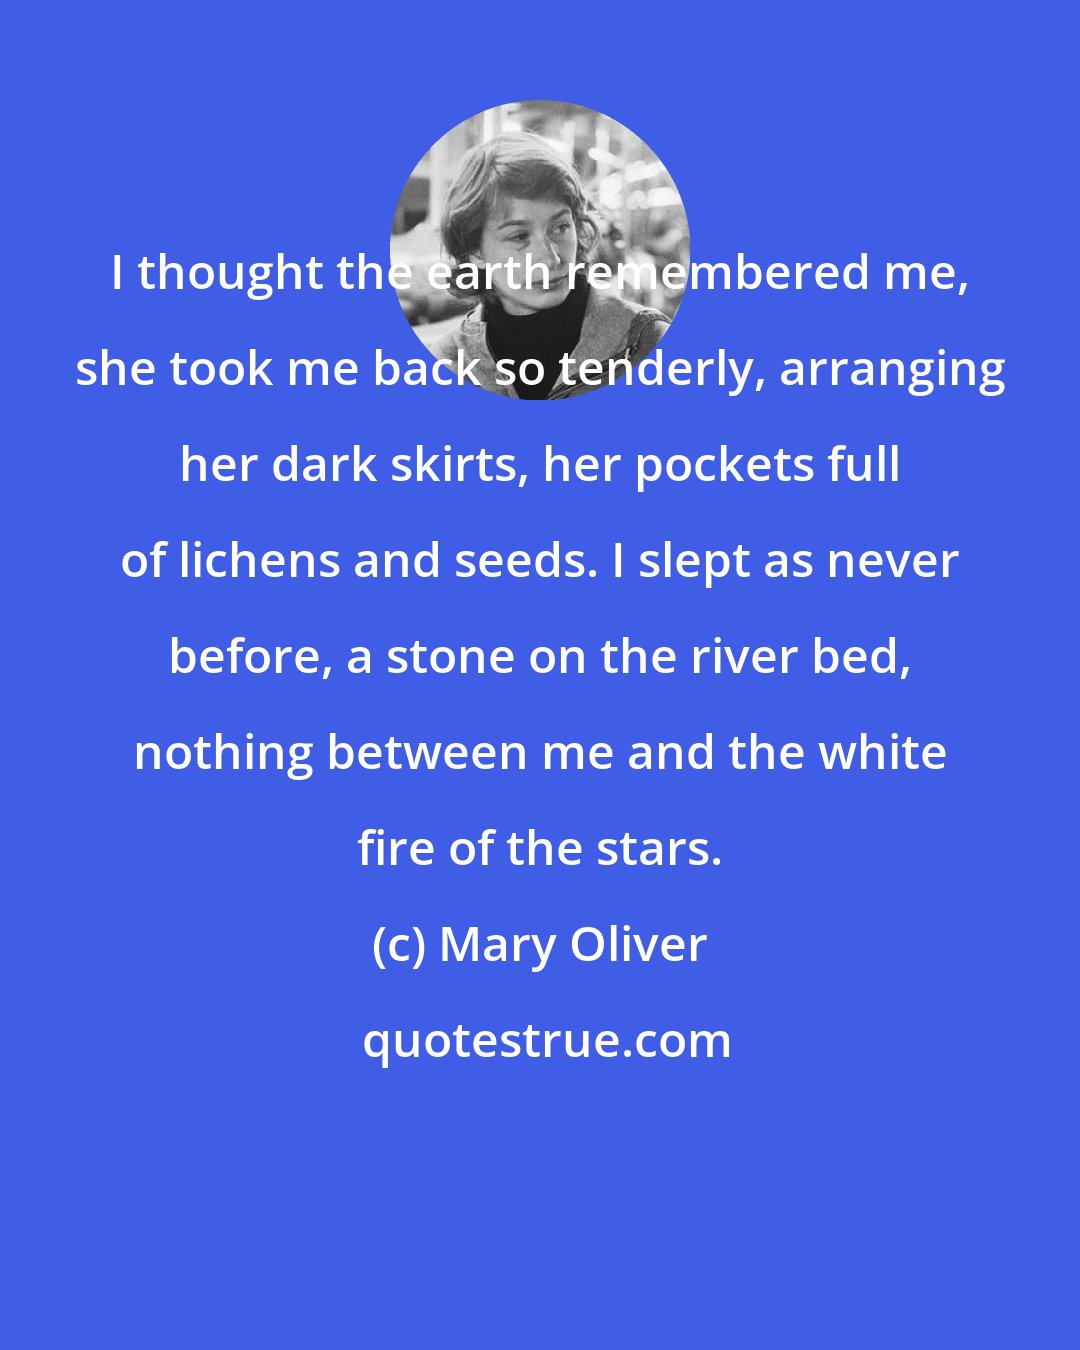 Mary Oliver: I thought the earth remembered me, she took me back so tenderly, arranging her dark skirts, her pockets full of lichens and seeds. I slept as never before, a stone on the river bed, nothing between me and the white fire of the stars.